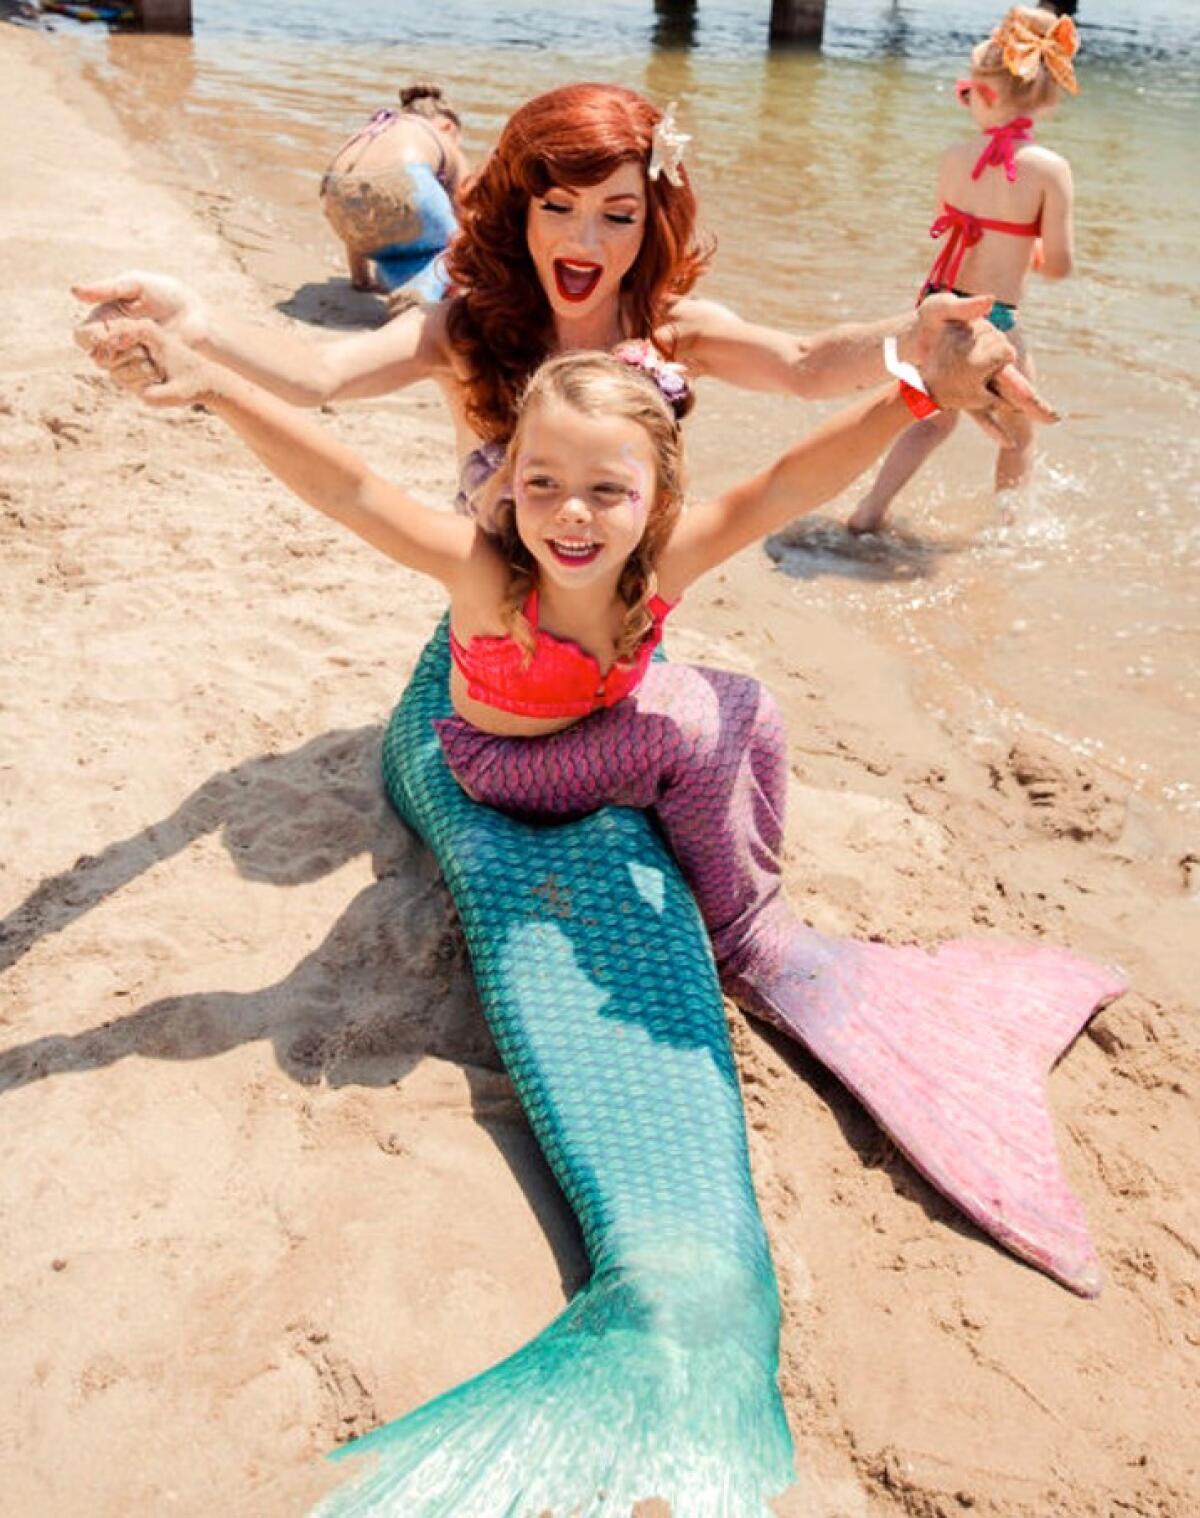 A mermaid from Once Upon An Island entertains a child mermaid on the Balboa Island beach near the business.